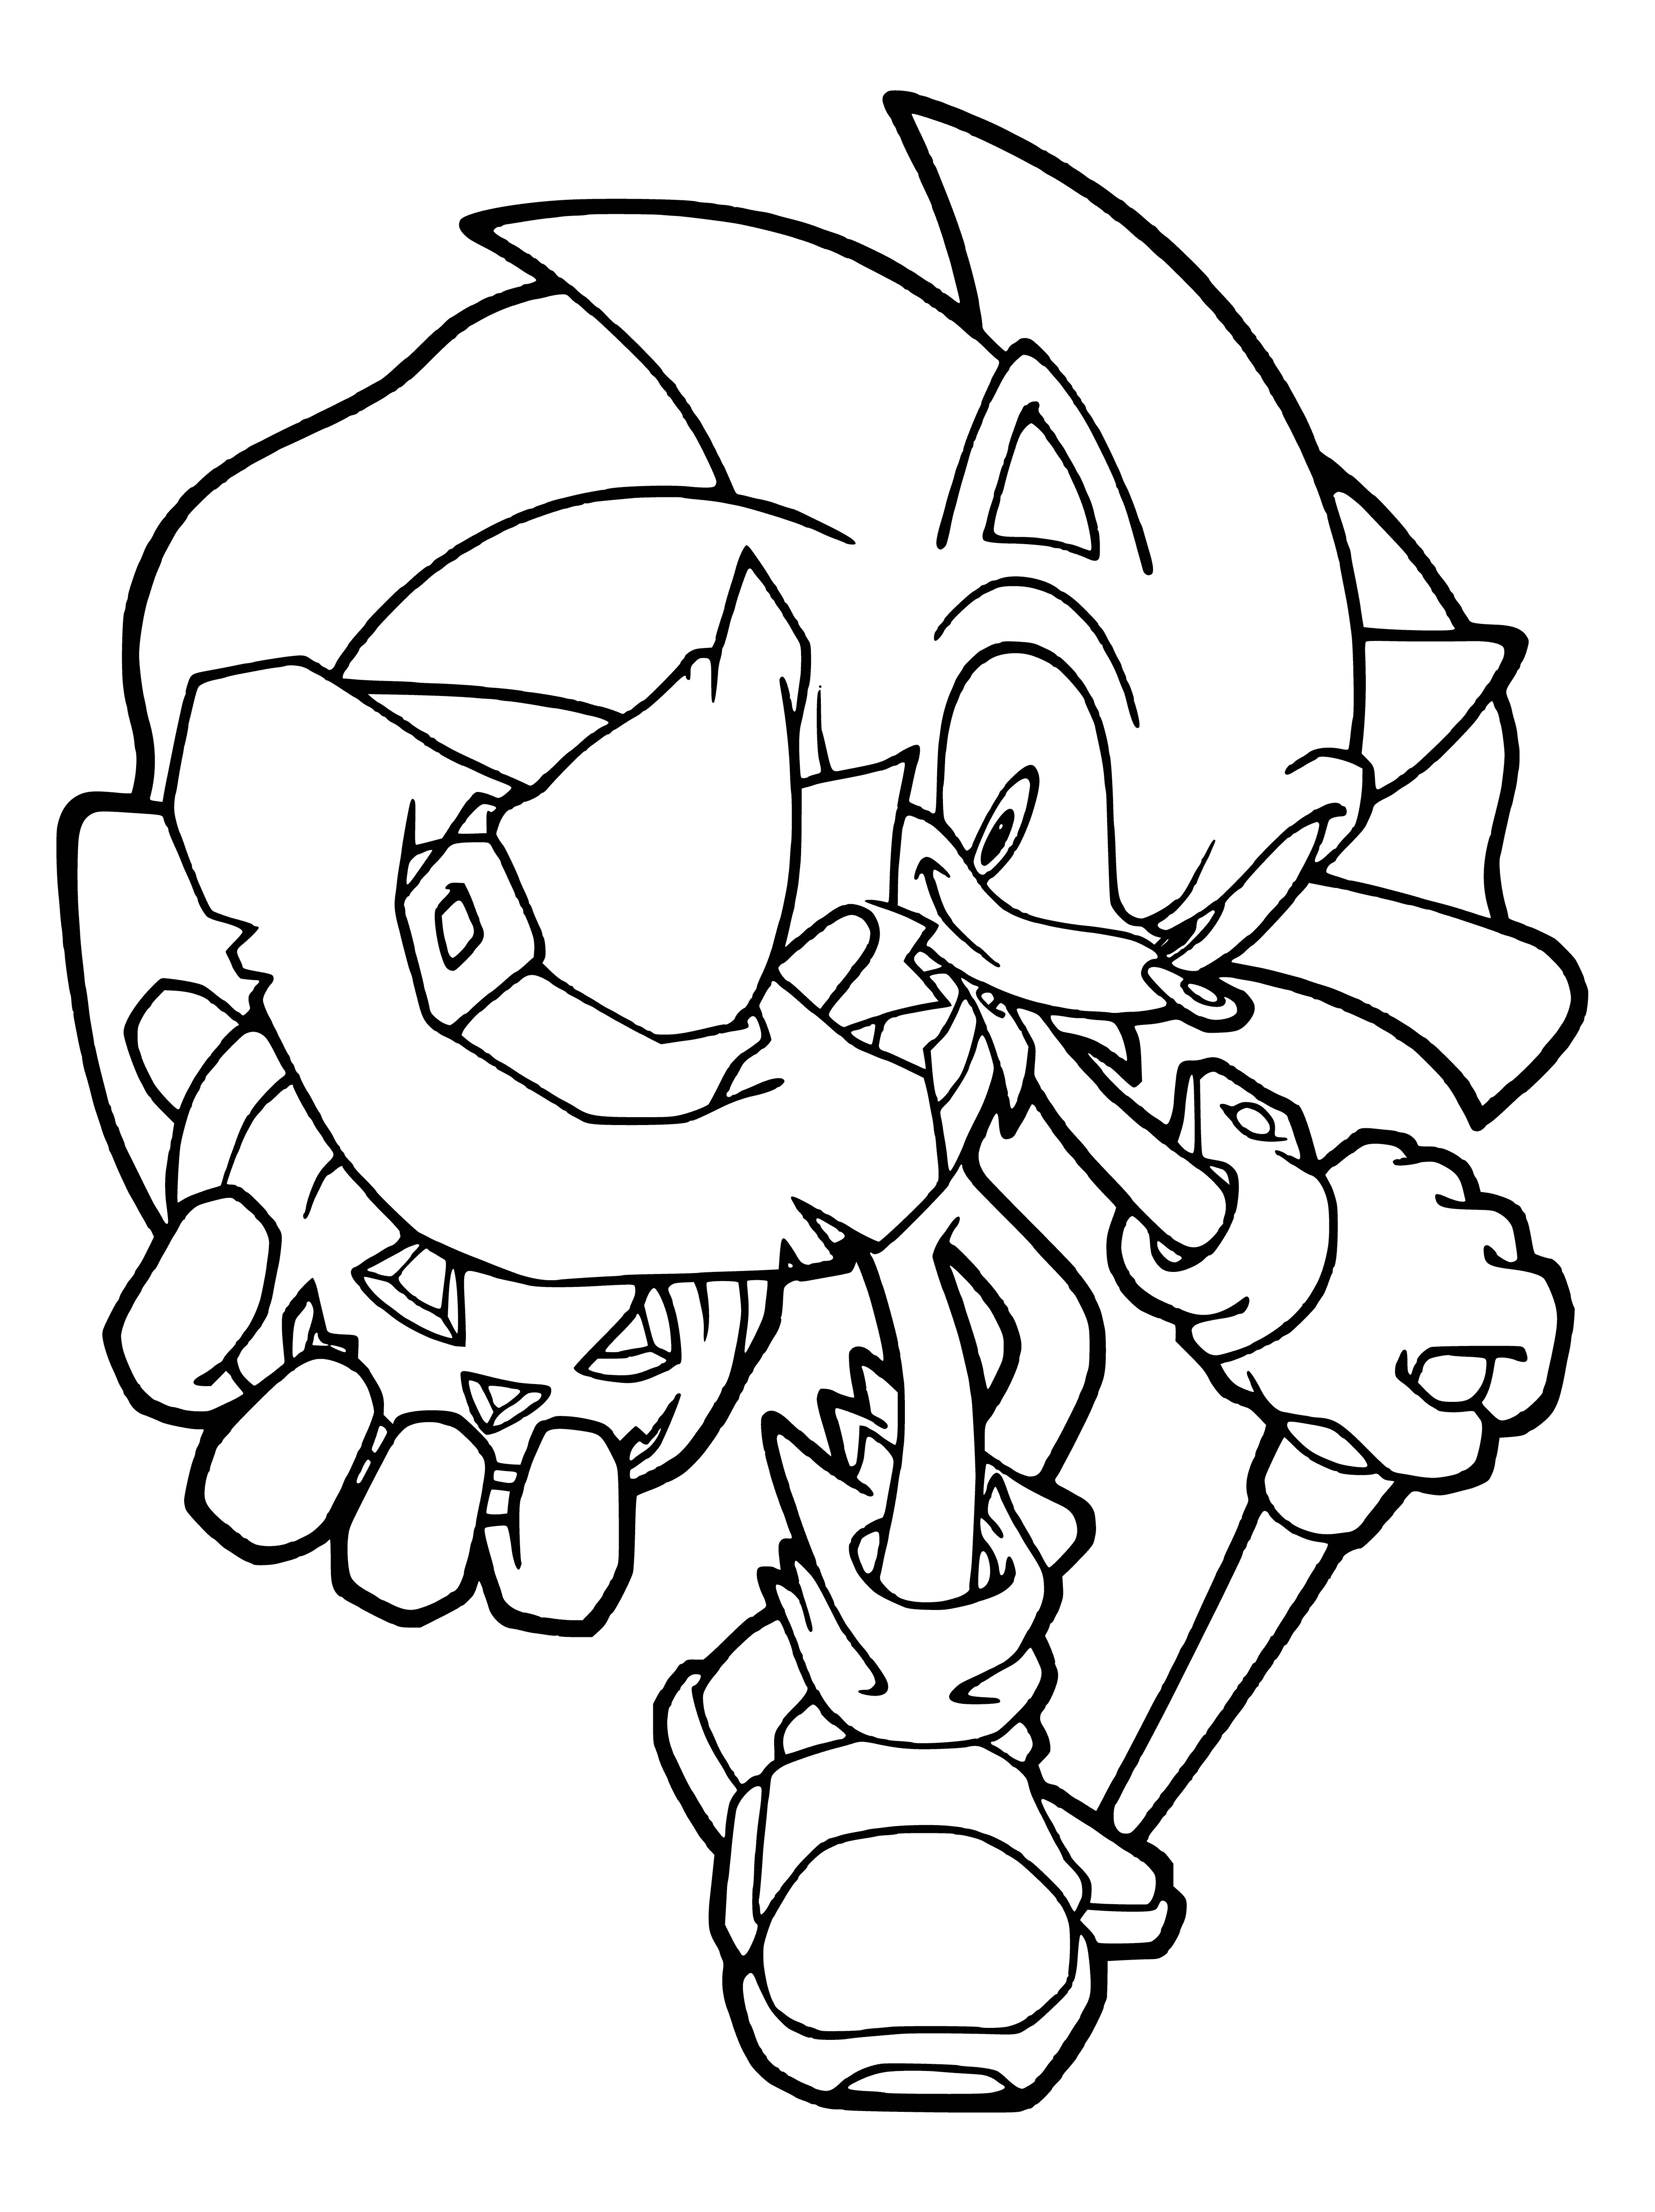 coloring page: Sonic and friends must hurry to stop Dr. Eggman from spoiling Halloween with his evil robots. They must use their speed, smarts, and teamwork to save the day from ghosts, a monster, and more. #SonicX